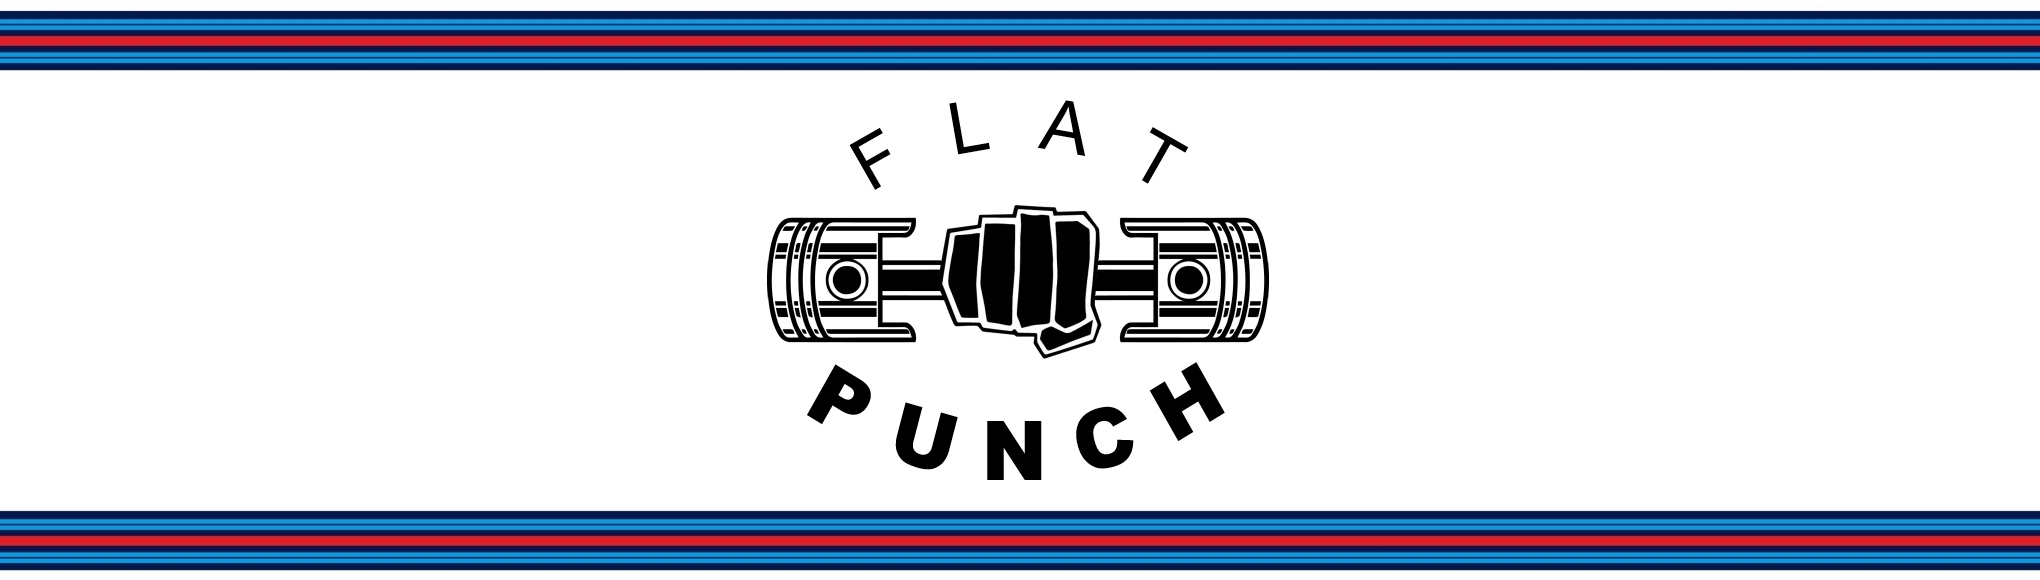 Flat Punch - A tribute to the Porsche 911 and the legendary Porsche's flat-six boxer engine.